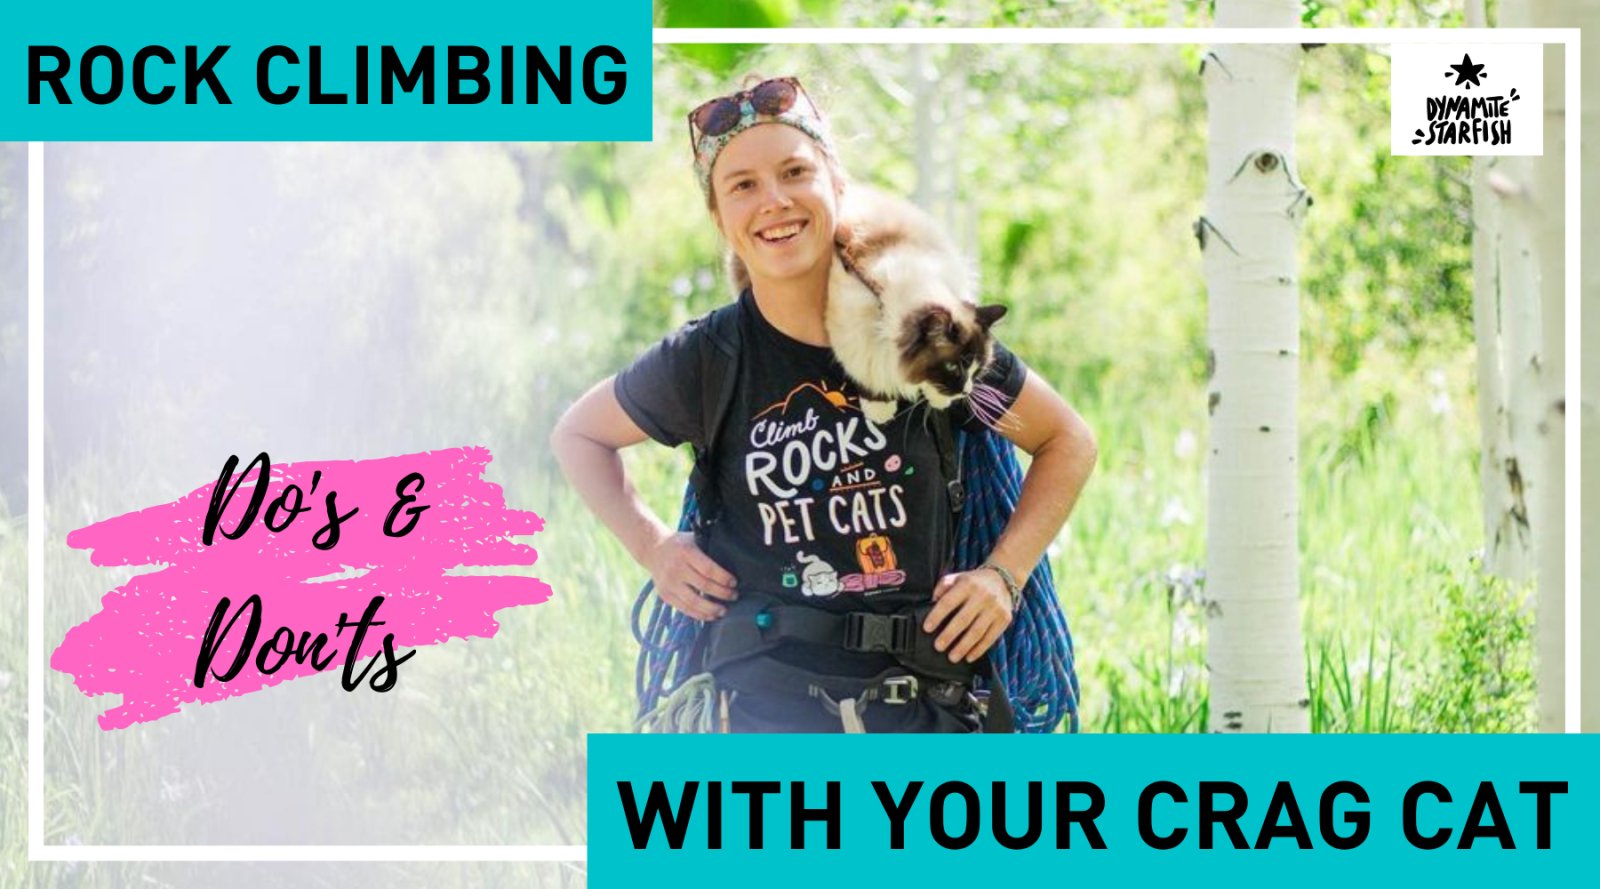 7 Crag Cat Do's and Don'ts: Bringing Your Cat Rock Climbing - Dynamite Starfish